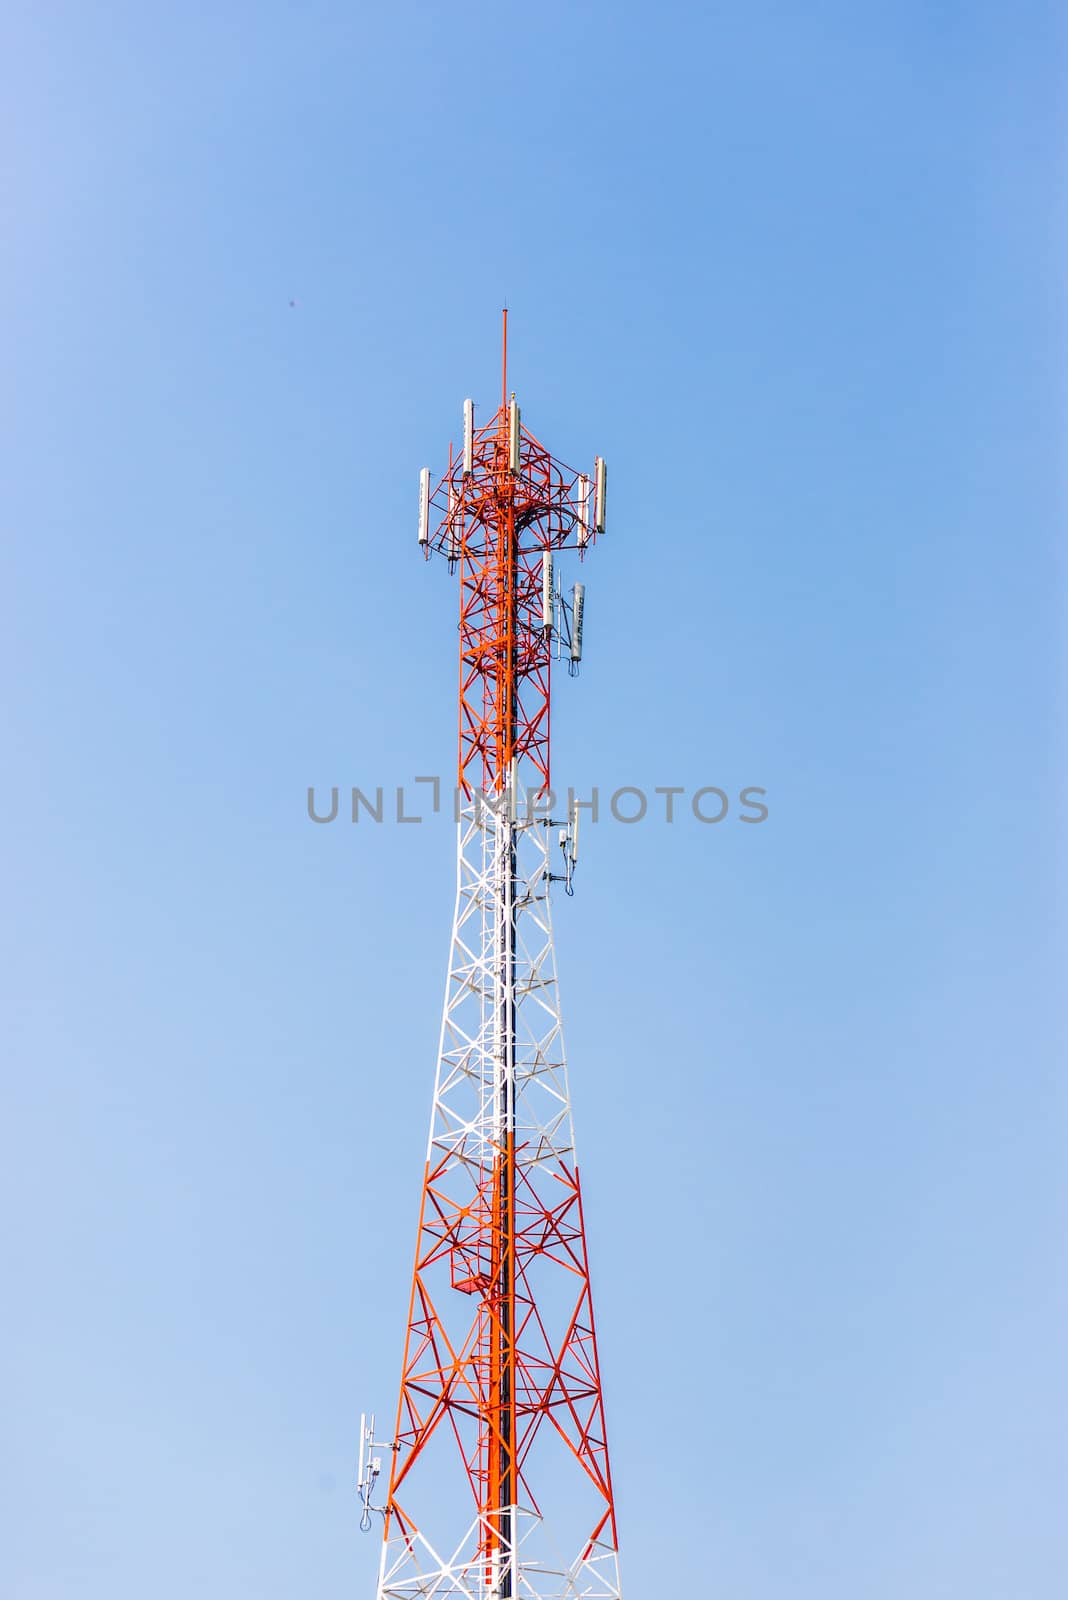 Cell phone signal station